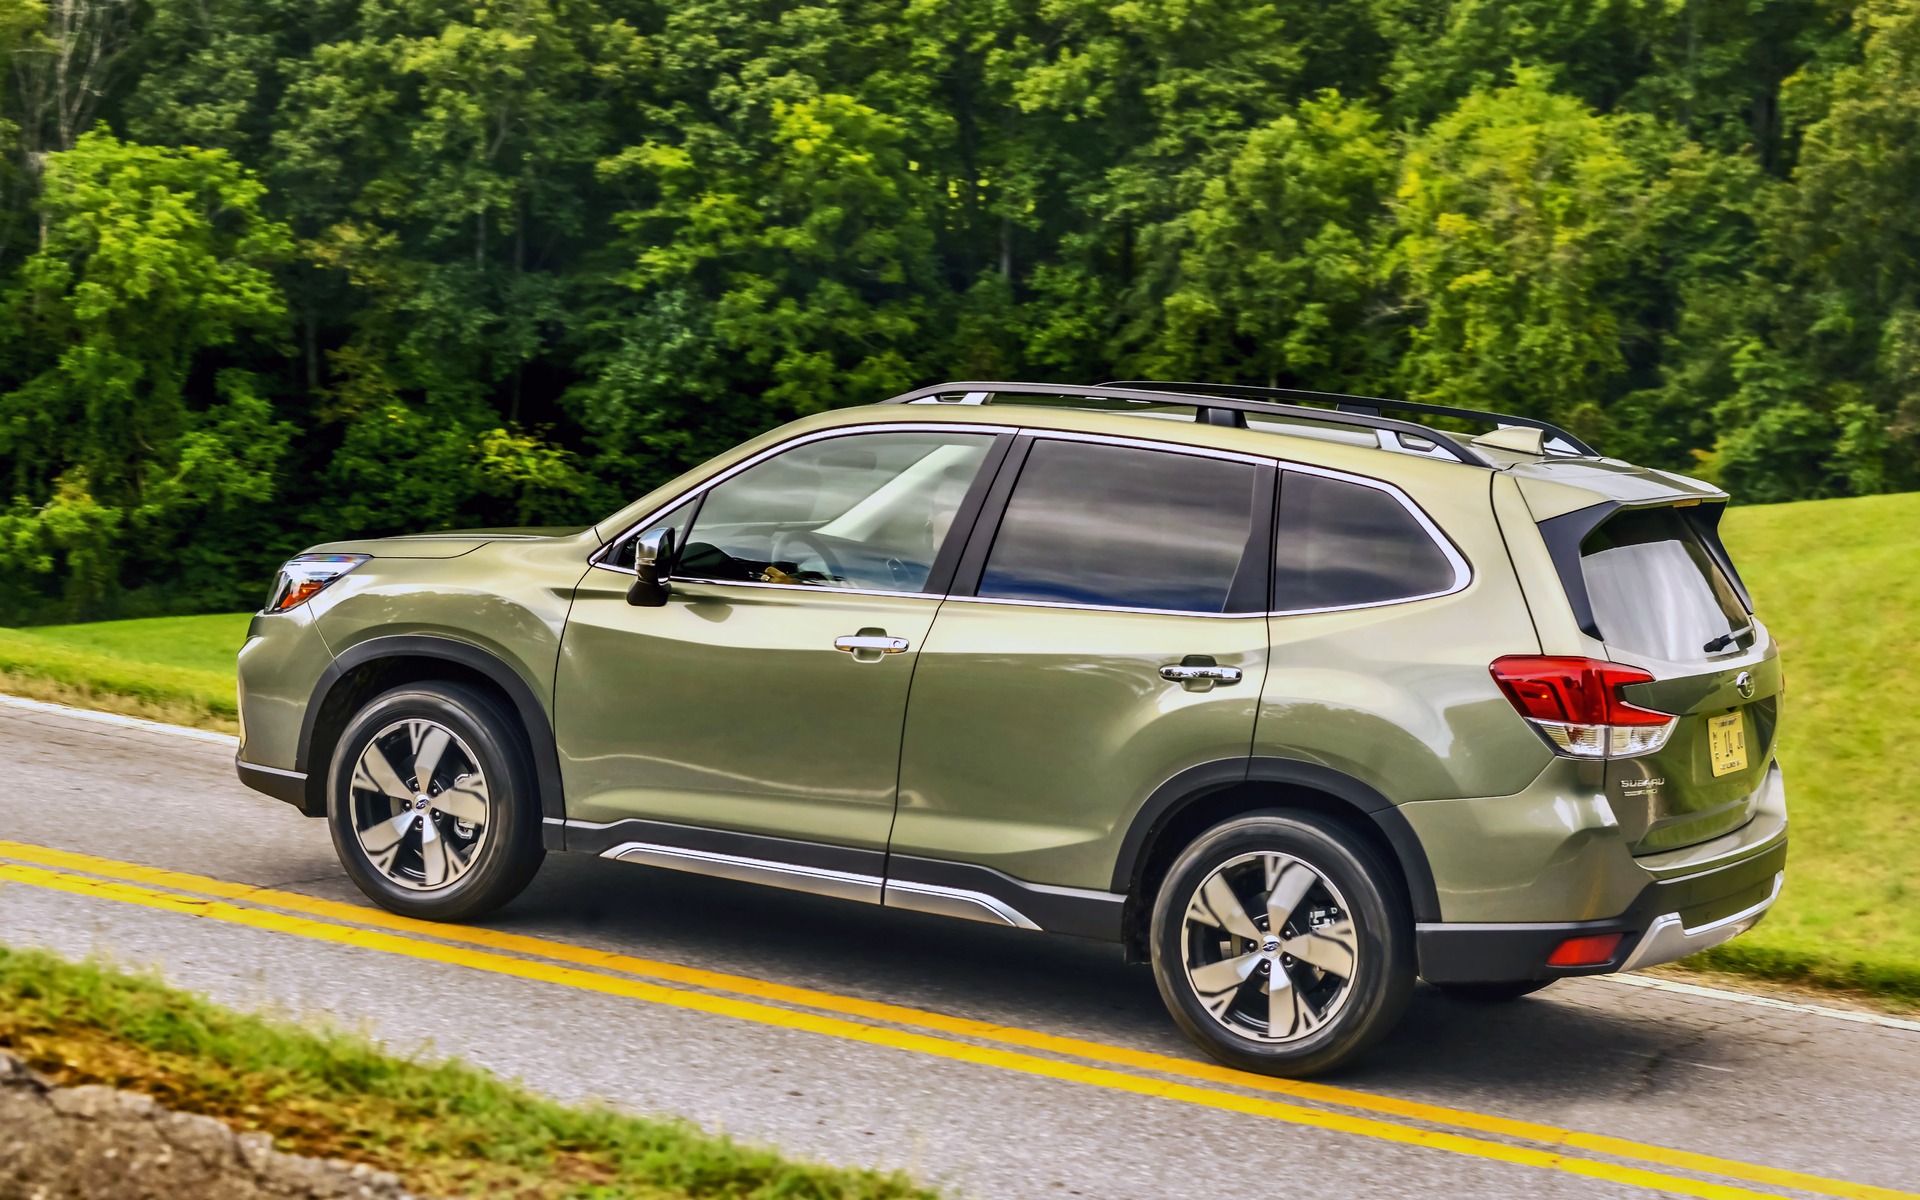 2020 Subaru Forester Gains Safety Tech, Convenience Features.